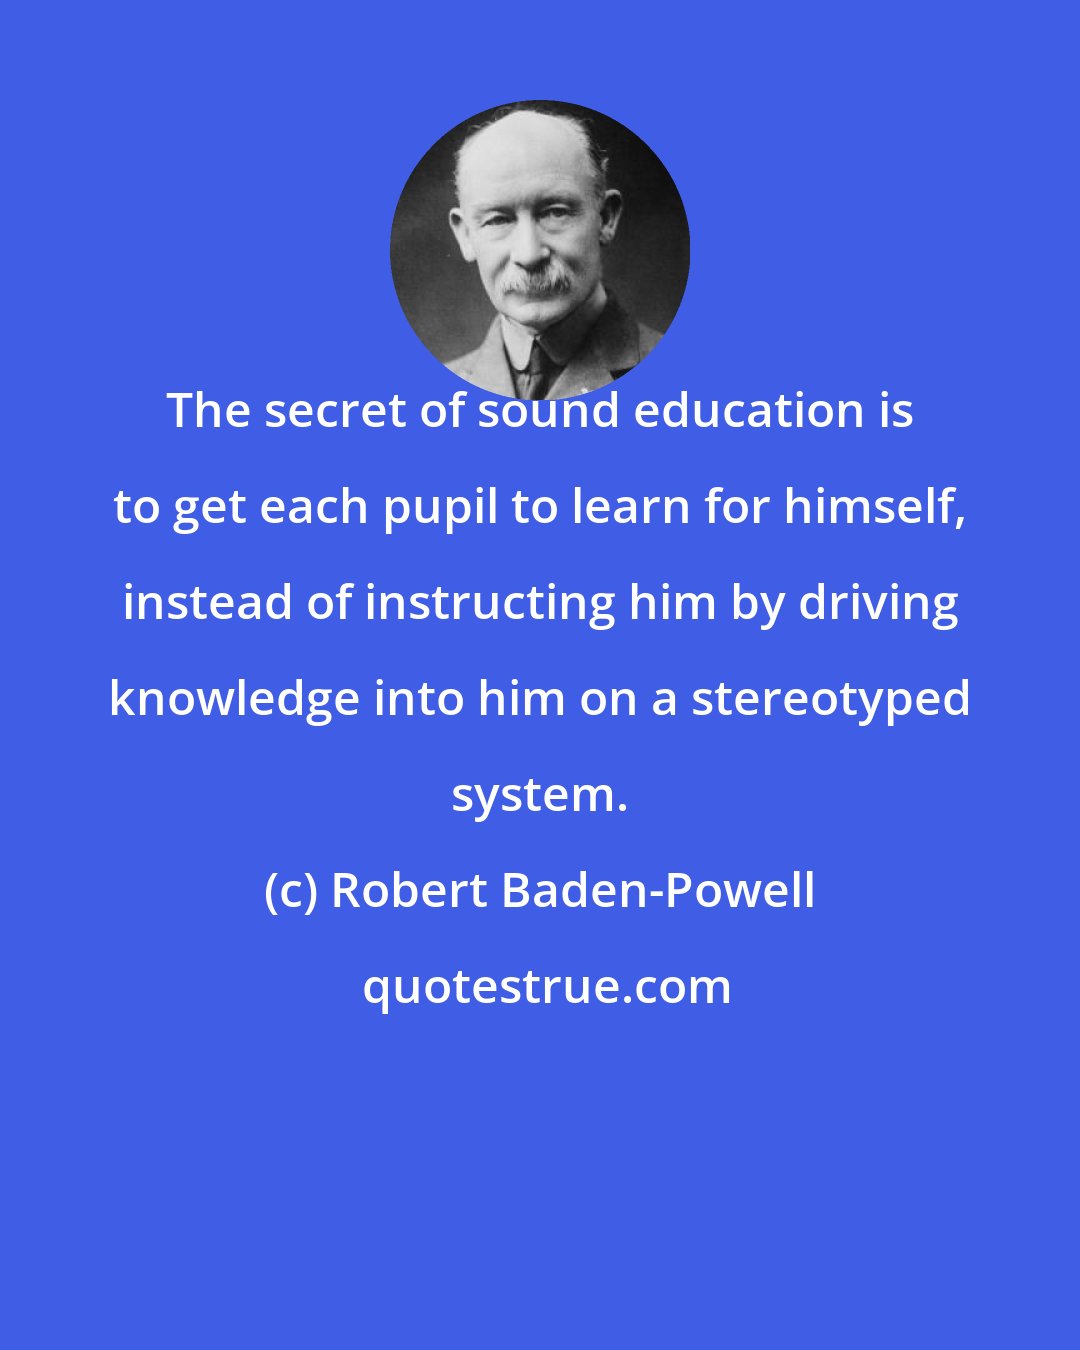 Robert Baden-Powell: The secret of sound education is to get each pupil to learn for himself, instead of instructing him by driving knowledge into him on a stereotyped system.